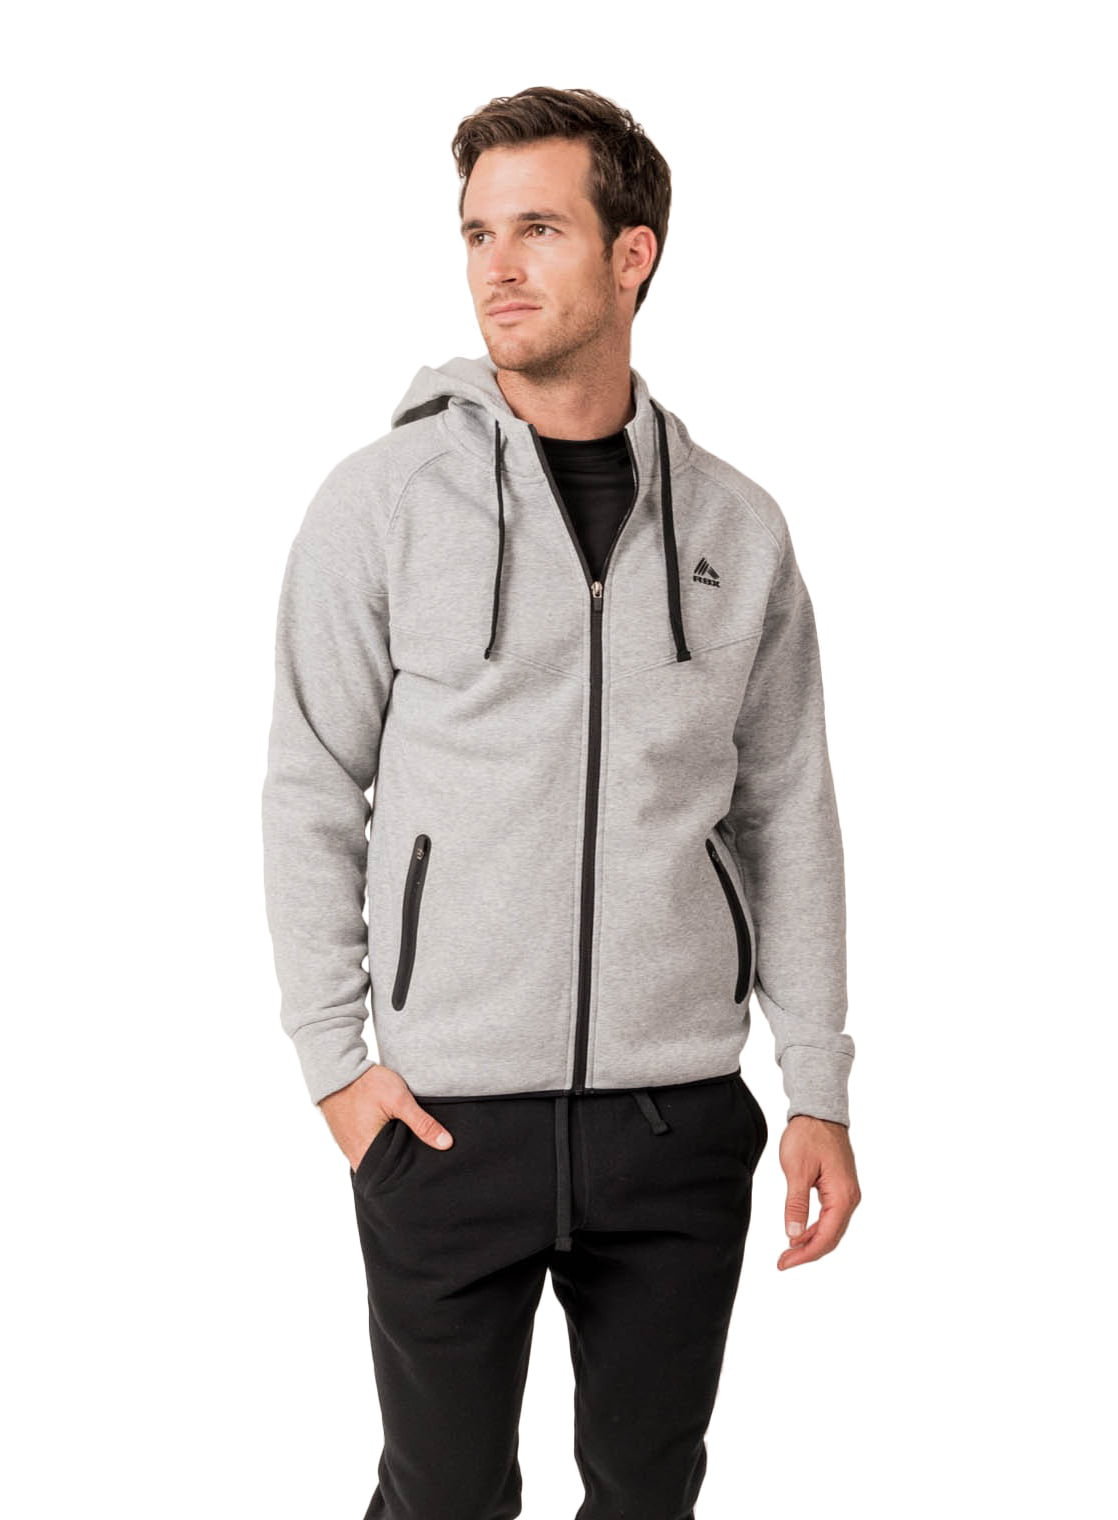 Details about   RBX X-DRI gray or yellow striped hooded sweatshirt w kangaroo pocket front,S-4